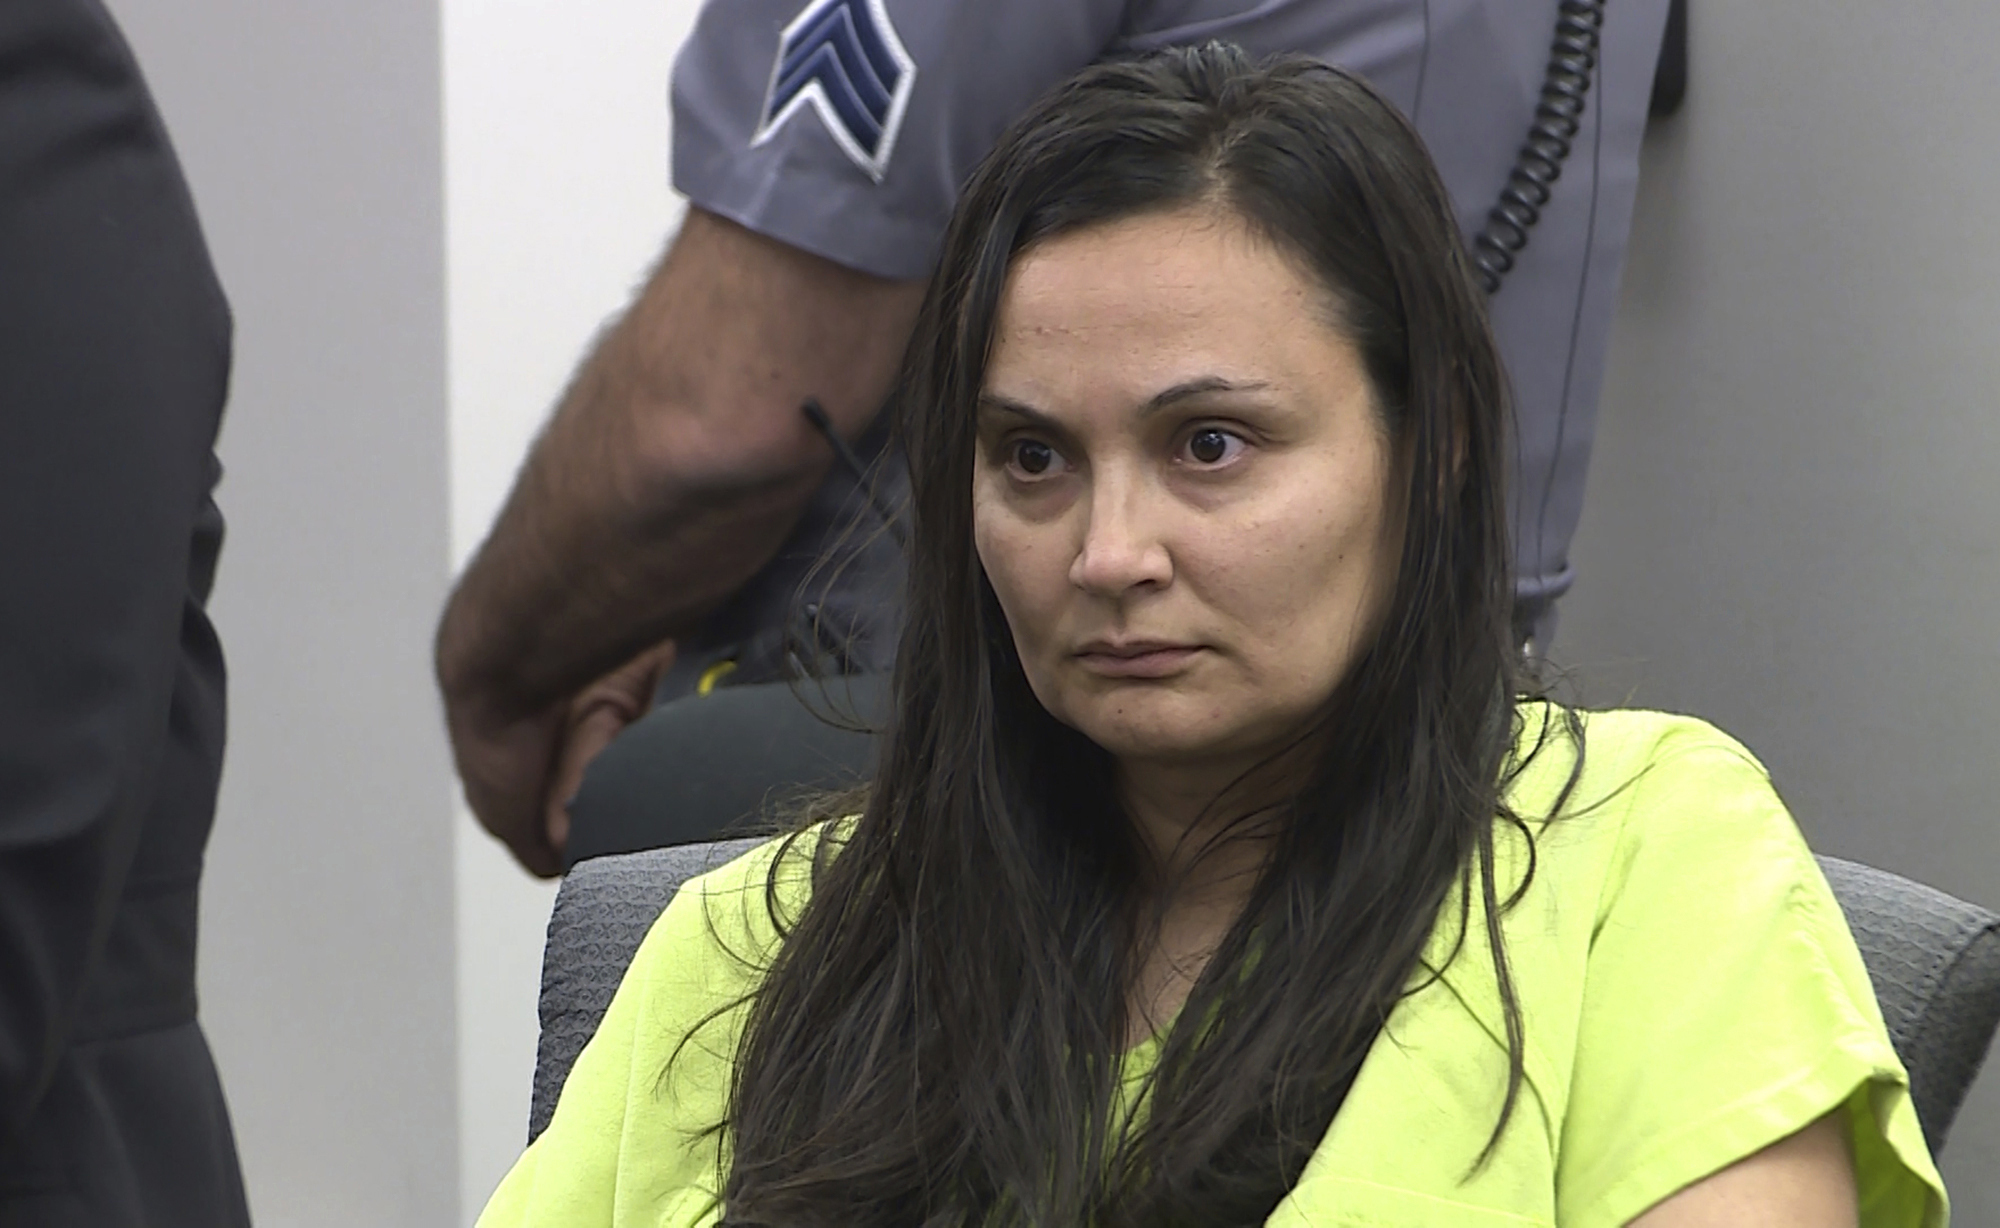 "Psychotic crack" led Letecia Stauch to kill stepson in southern